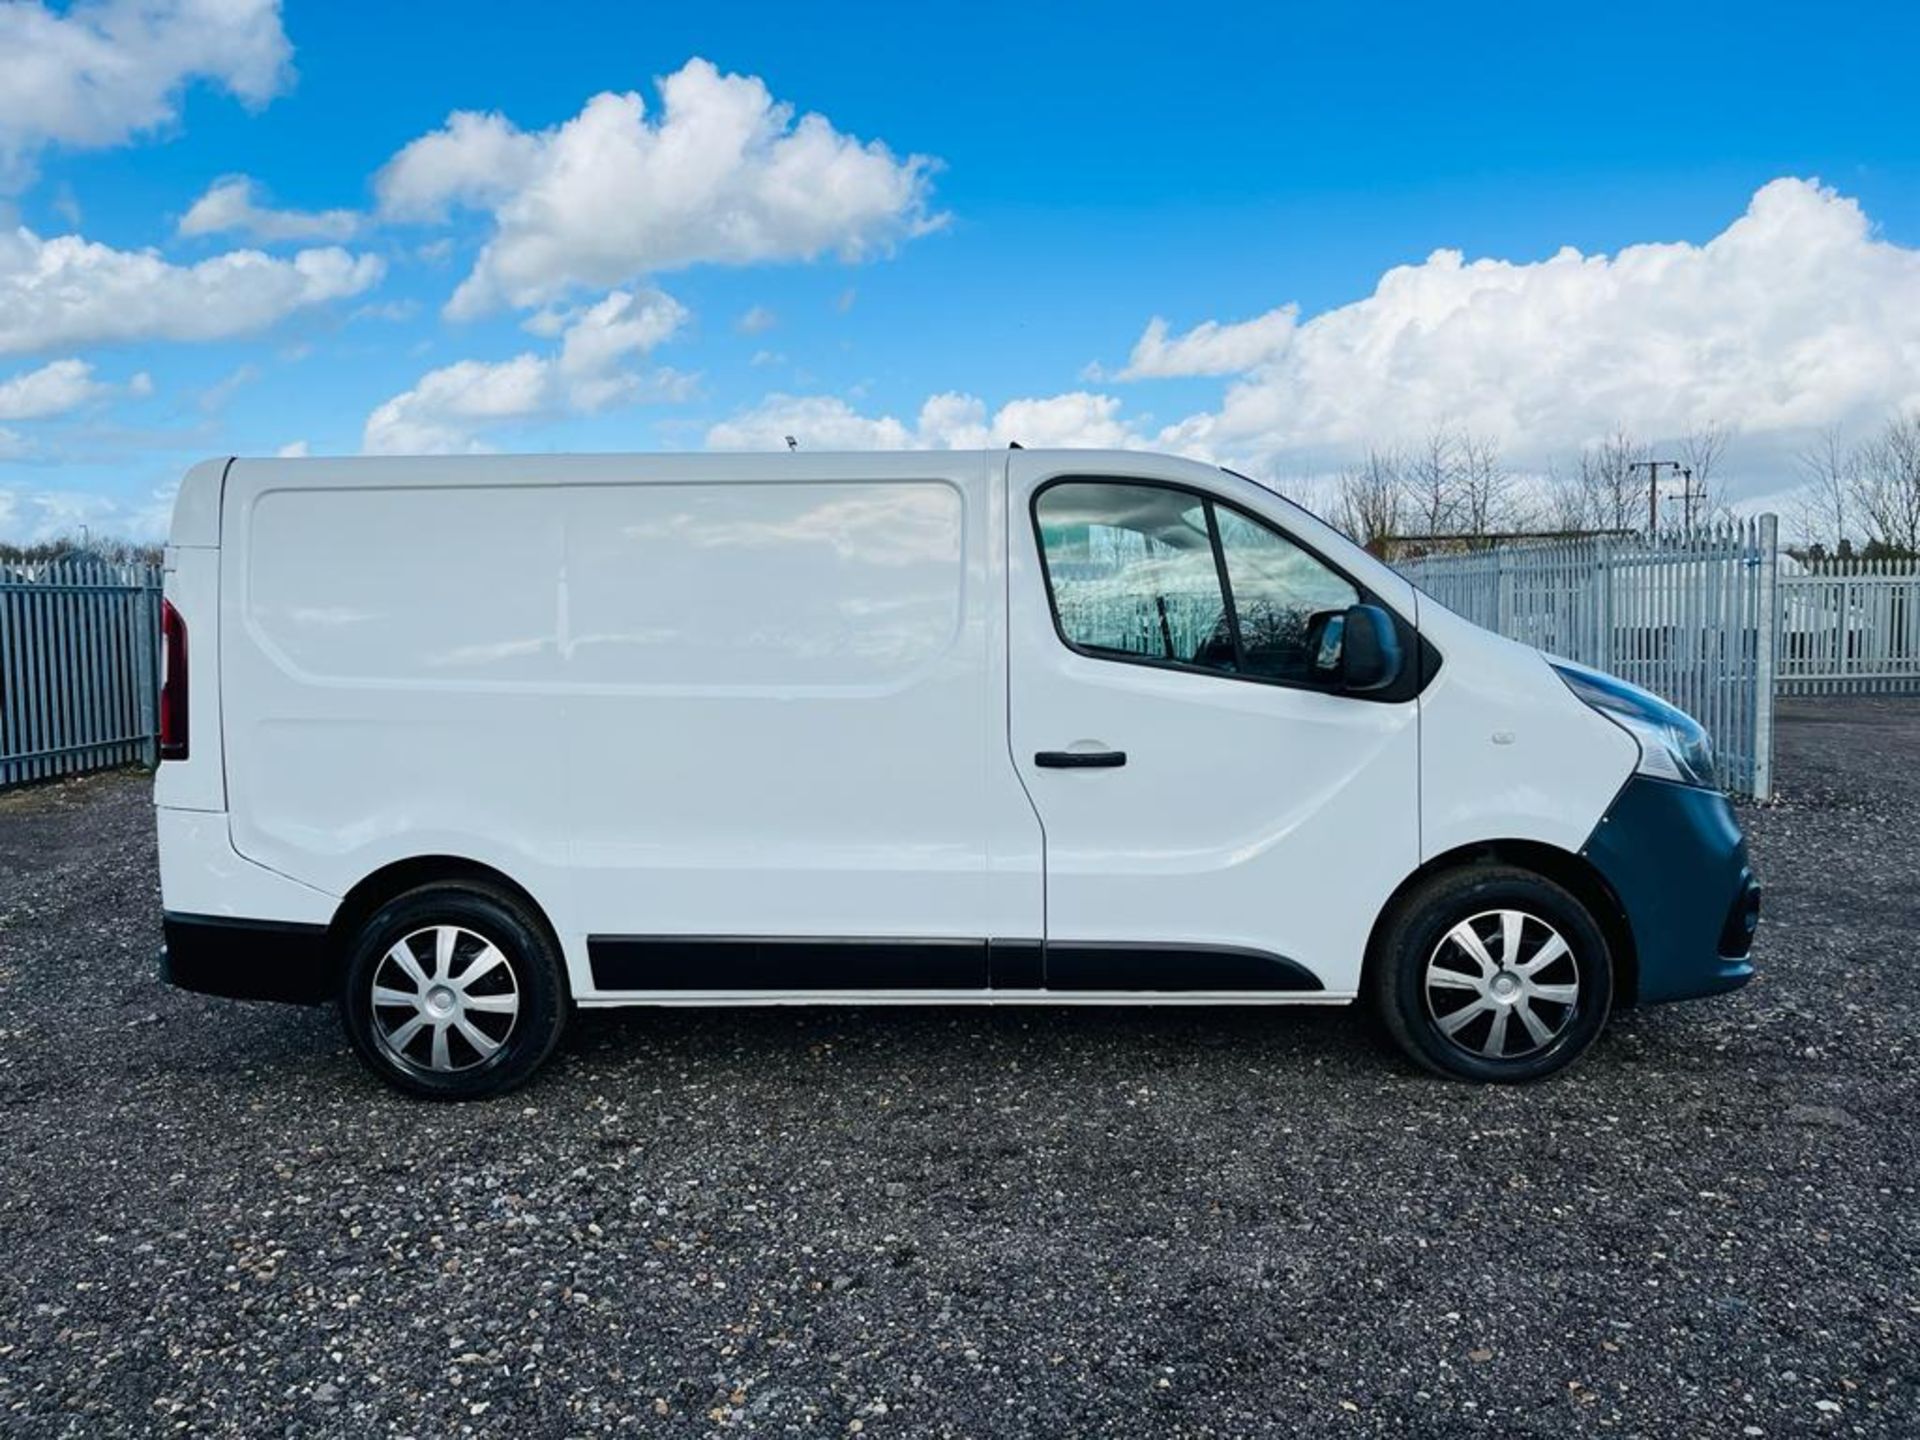 ** ON SALE ** Renault Trafic SL27 Business + 1.6 DCI 115 L1 H1 2016 '16 Reg' -A/C- Only 69794 Miles - Image 12 of 25